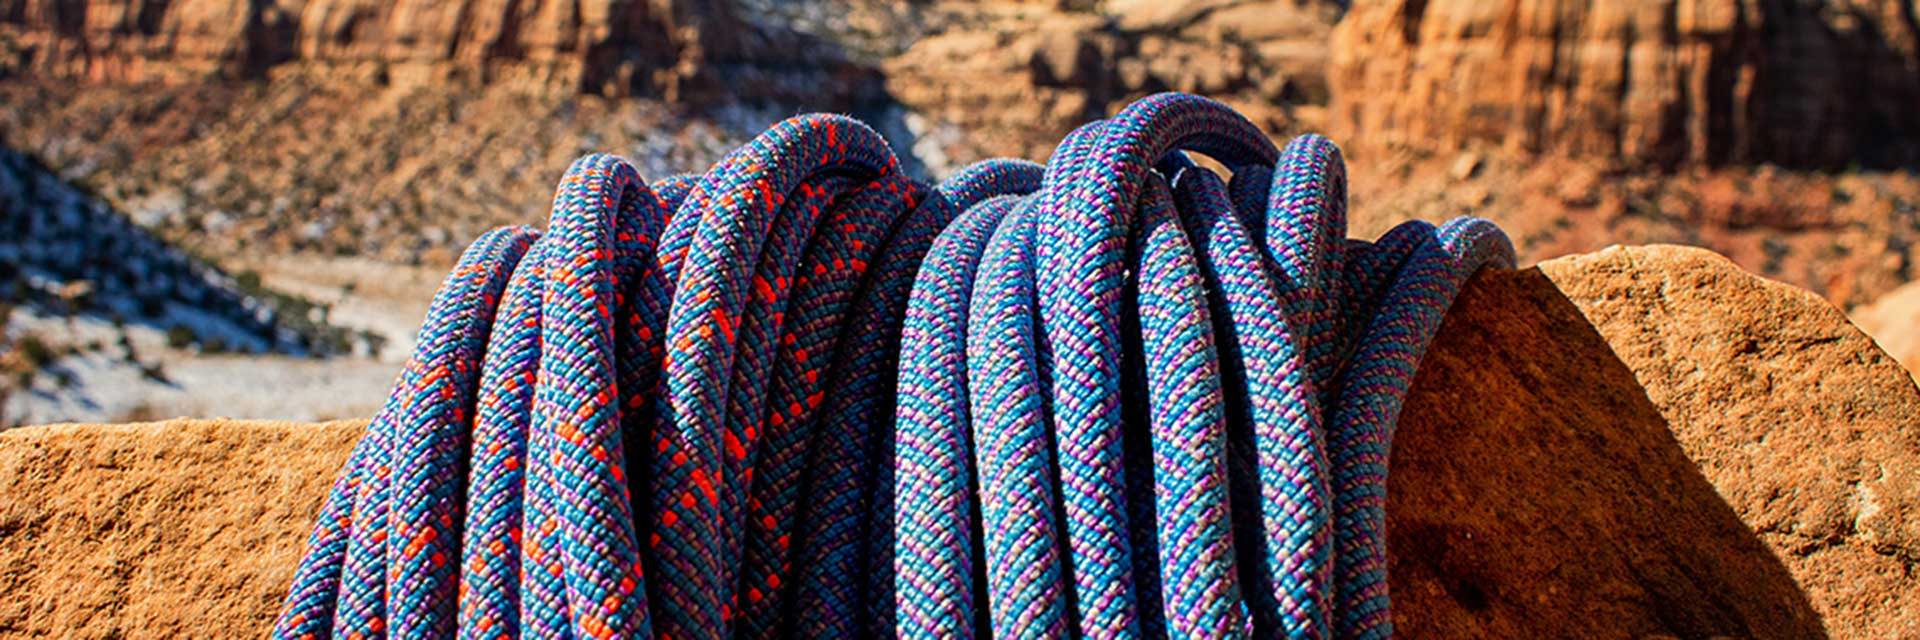 image of ropes laying on red rocks